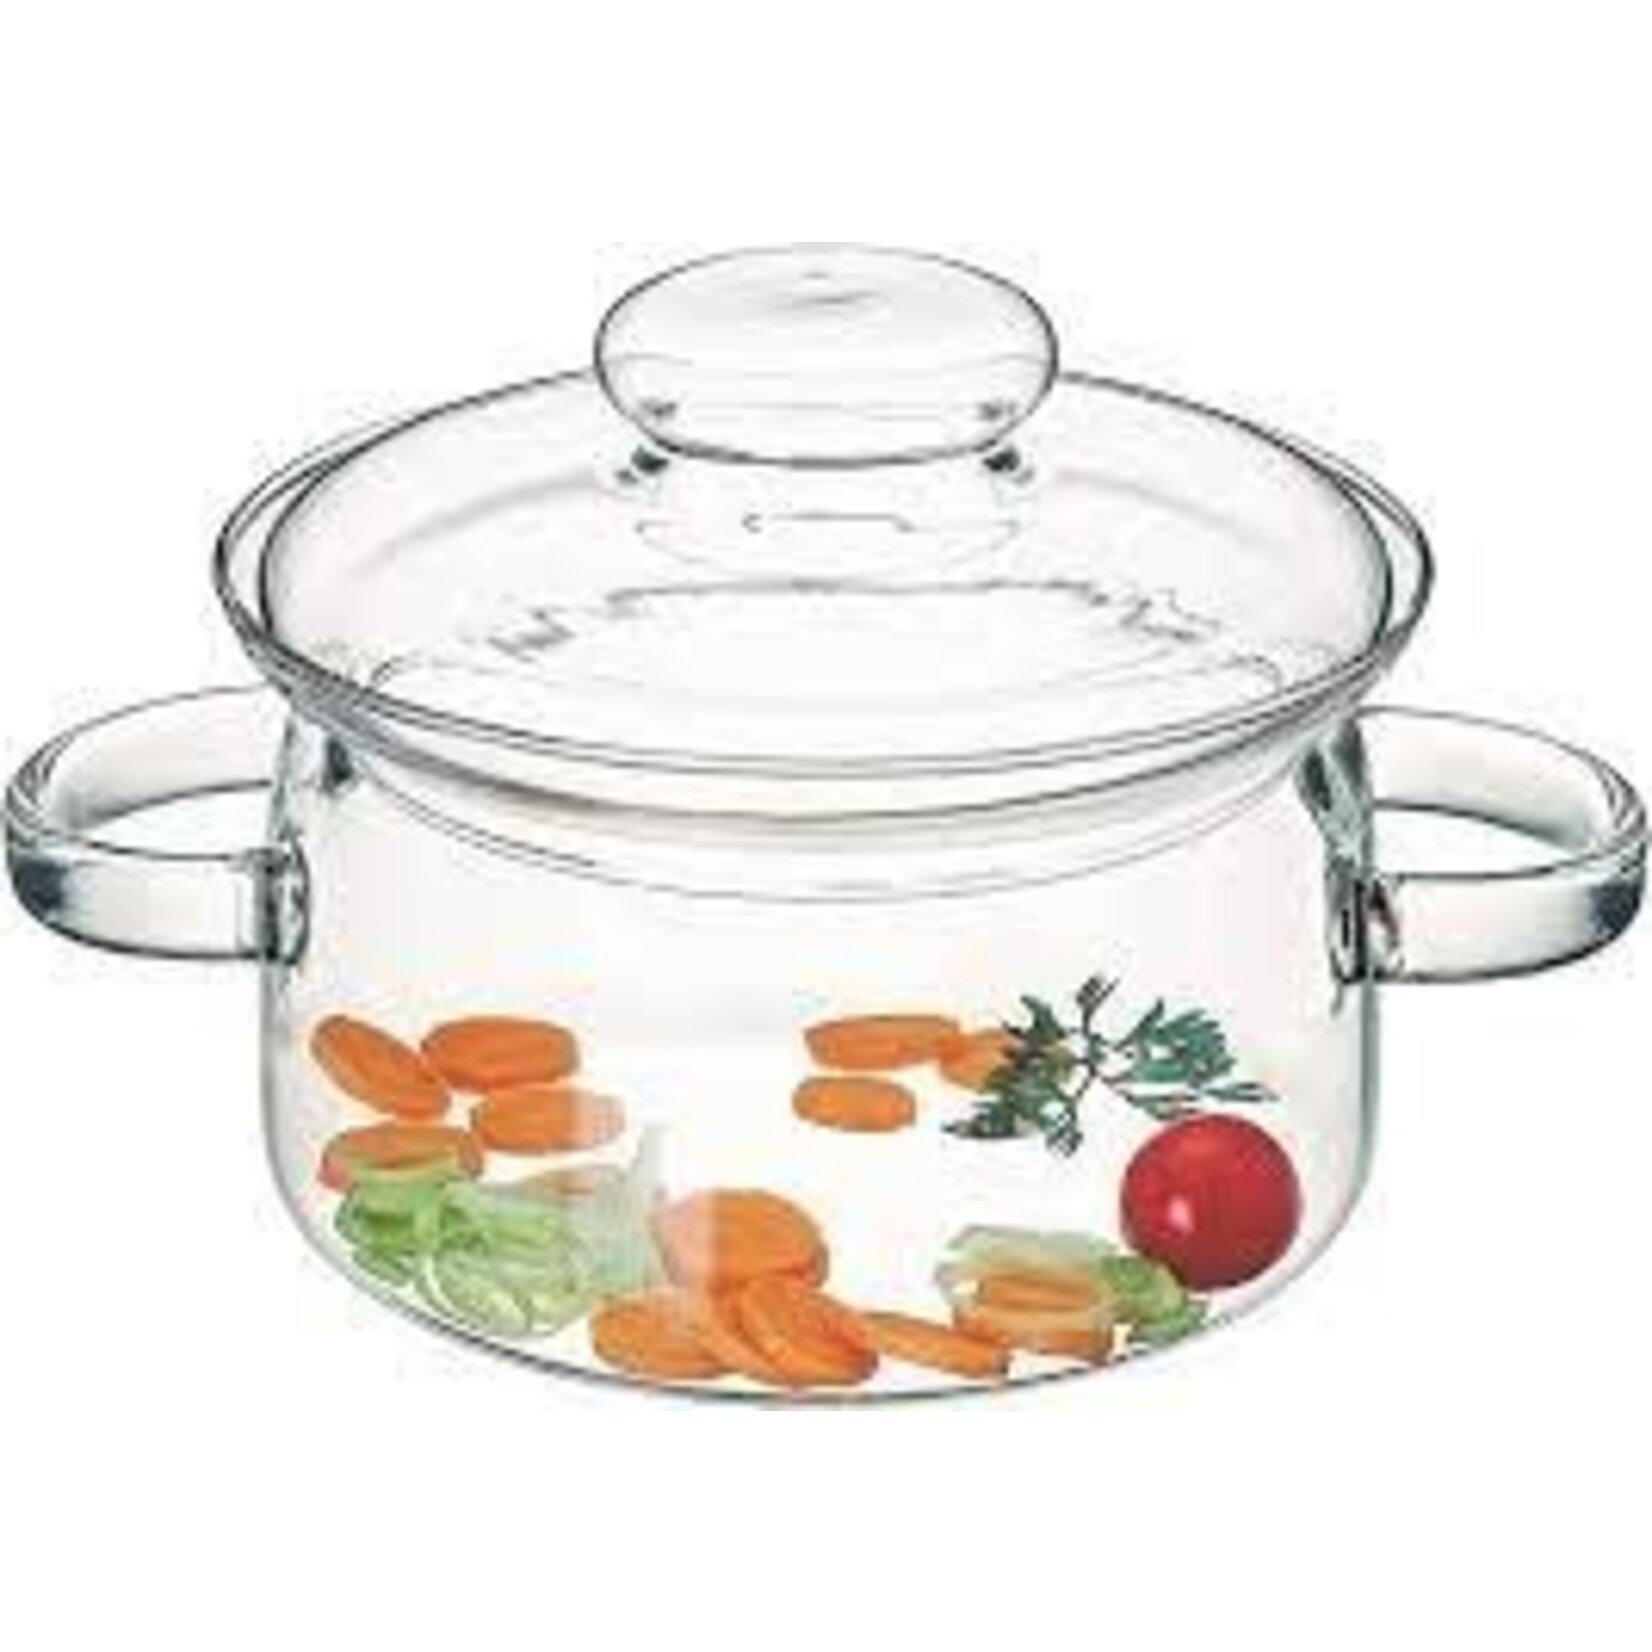 Simax Special order SX-6063 Simax 1.5 Liter glass pot & lid